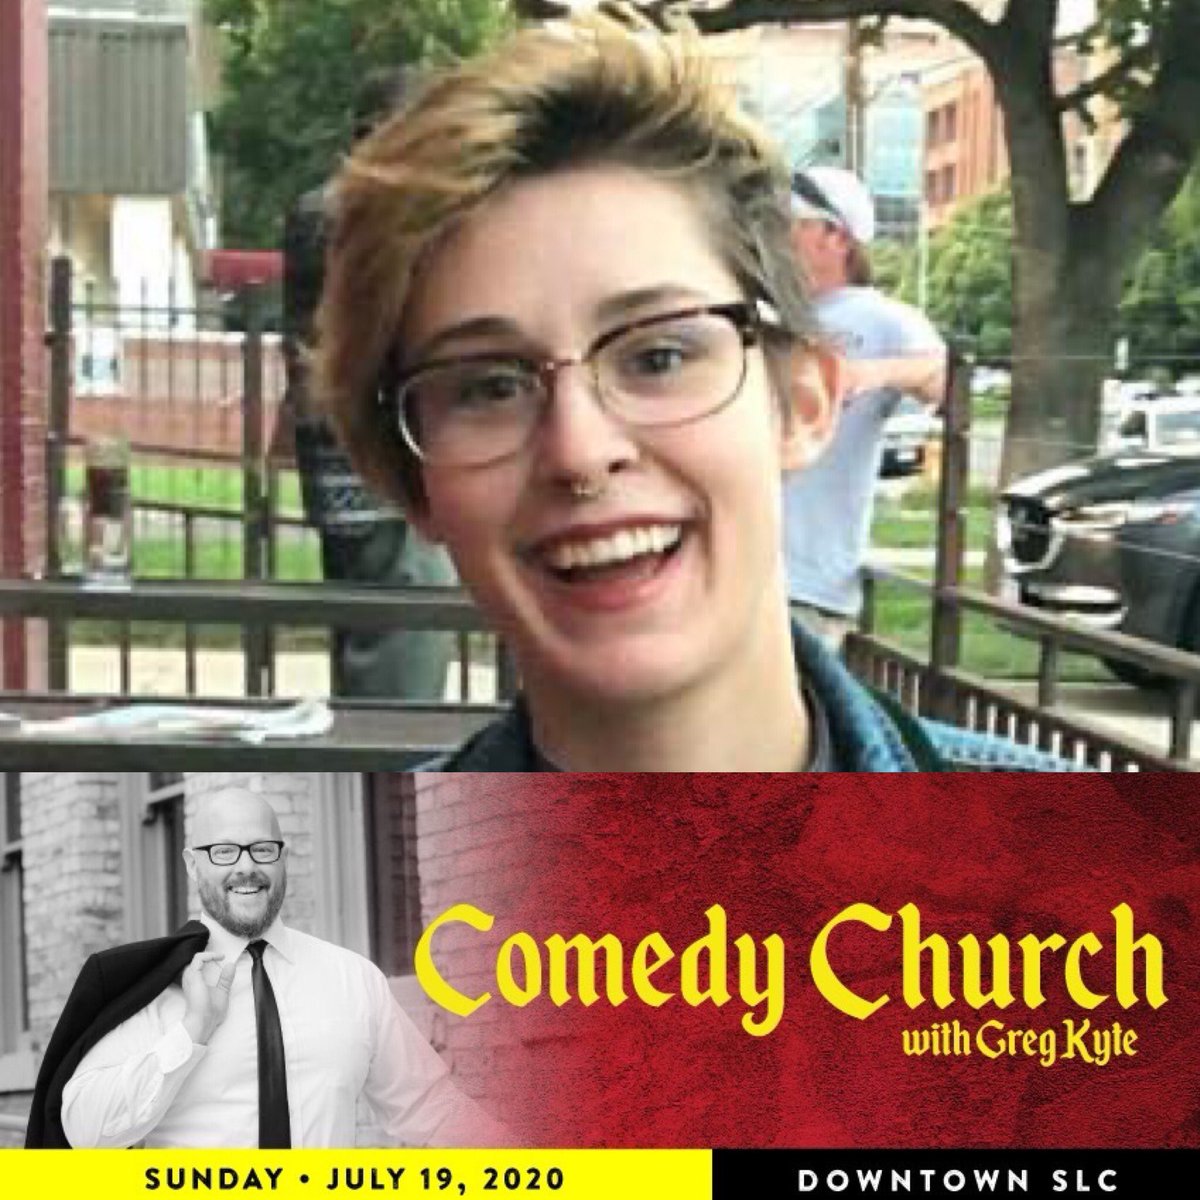 Sunday, July 19, is our LGBTQ service! We’re going to have Carol Merrill on the show! 🙌 Ticket info here —> wiseguyscomedy.com/events/comedy-…

#comedychurch #SLC #sundayinslc #postmormon #exmormon #exmo #exlds @gregkyte @robotequality #utahlgbt #utahlgbtq #slclgbt #slclgbtq #lgbtutah